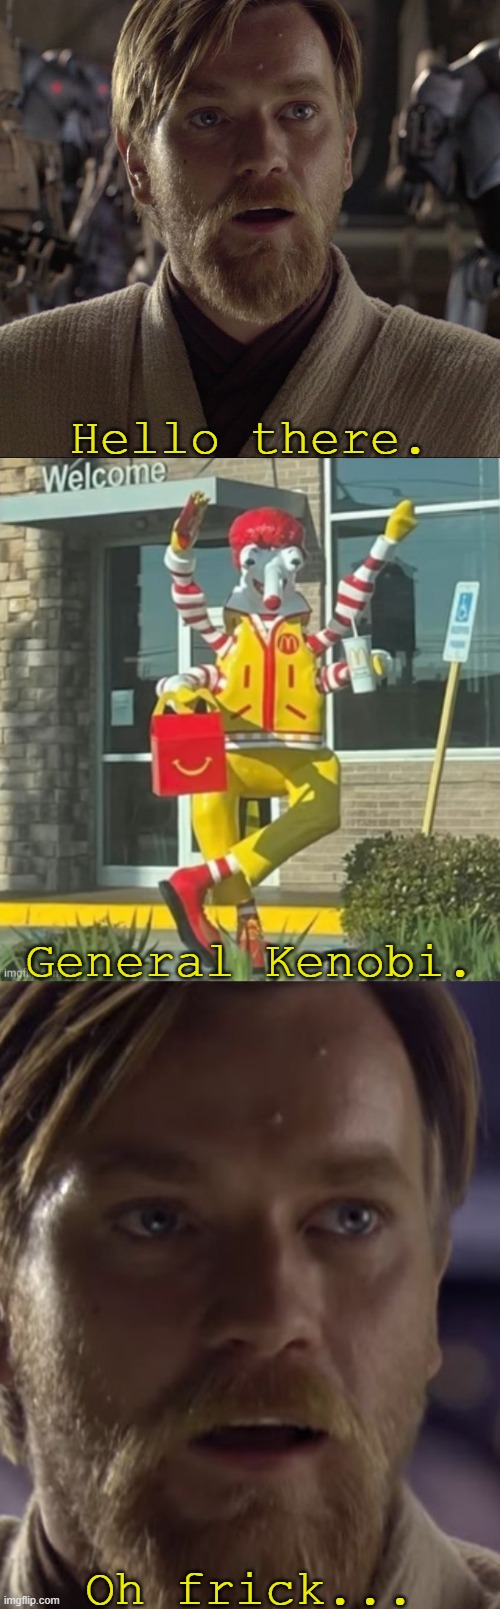 General Ronaldous | Hello there. General Kenobi. Oh frick... | image tagged in cursed ronald mcdonald,hello there,obi wan kenobi,star wars,mcdonald's,general grievous | made w/ Imgflip meme maker